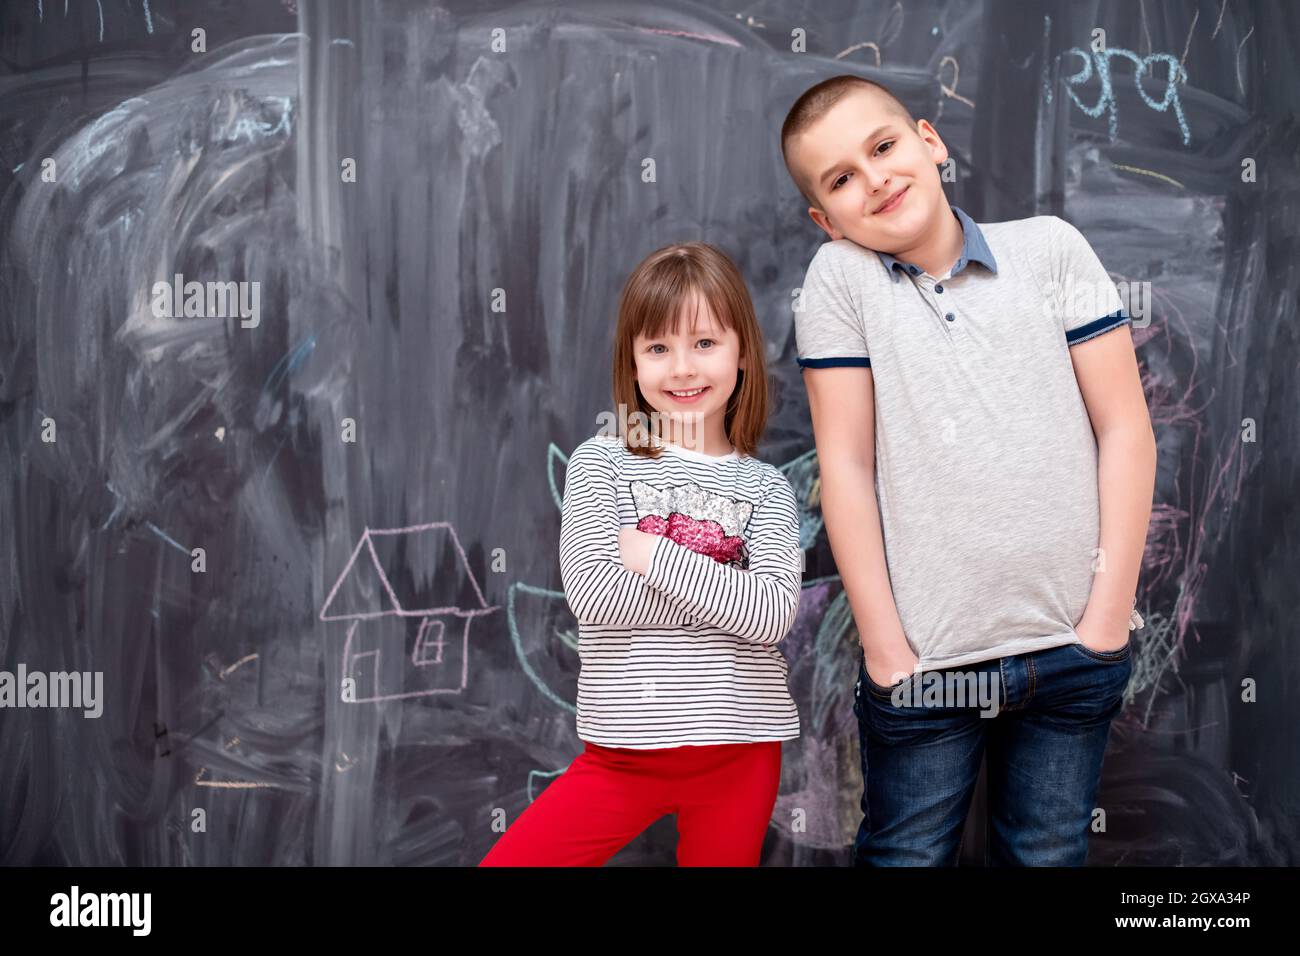 group portrait of happy childrens boy and little girl standing in front of black chalkboard Stock Photo